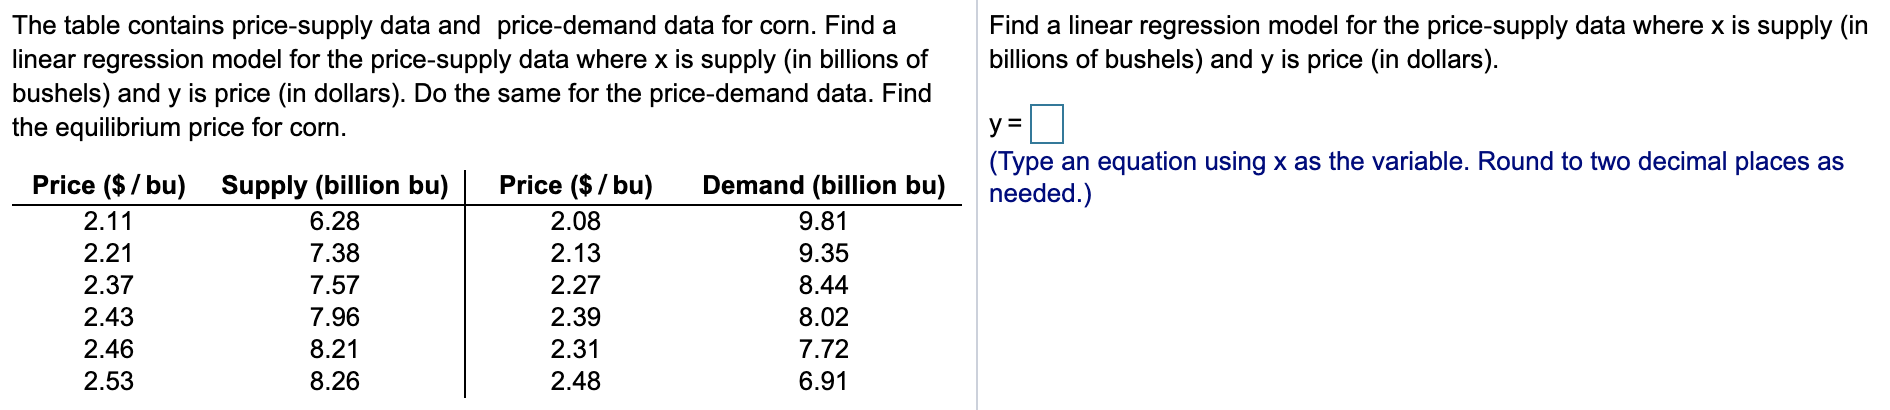 The table contains price-supply data and price-demand data for corn. Find a
linear regression model for the price-supply data where x is supply (in billions of
bushels) and y is price (in dollars). Do the same for the price-demand data. Find
the equilibrium price for corn
Find a linear regression model for the price-supply data where x is supply (in
billions of bushels) and y is price (in dollars)
(Type an equation using x as the variable. Round to two decimal places as
needed.)
Price ($/bu)
Demand (billion bu)
Supply (billion bu)
Price ($/bu)
2.11
6.28
2.08
9.81
2.21
7.38
2.13
9.35
2.37
7.57
2.27
8.44
2.43
7.96
2.39
8.02
2.46
8.21
2.31
7.72
2.53
8.26
2.48
6.91
